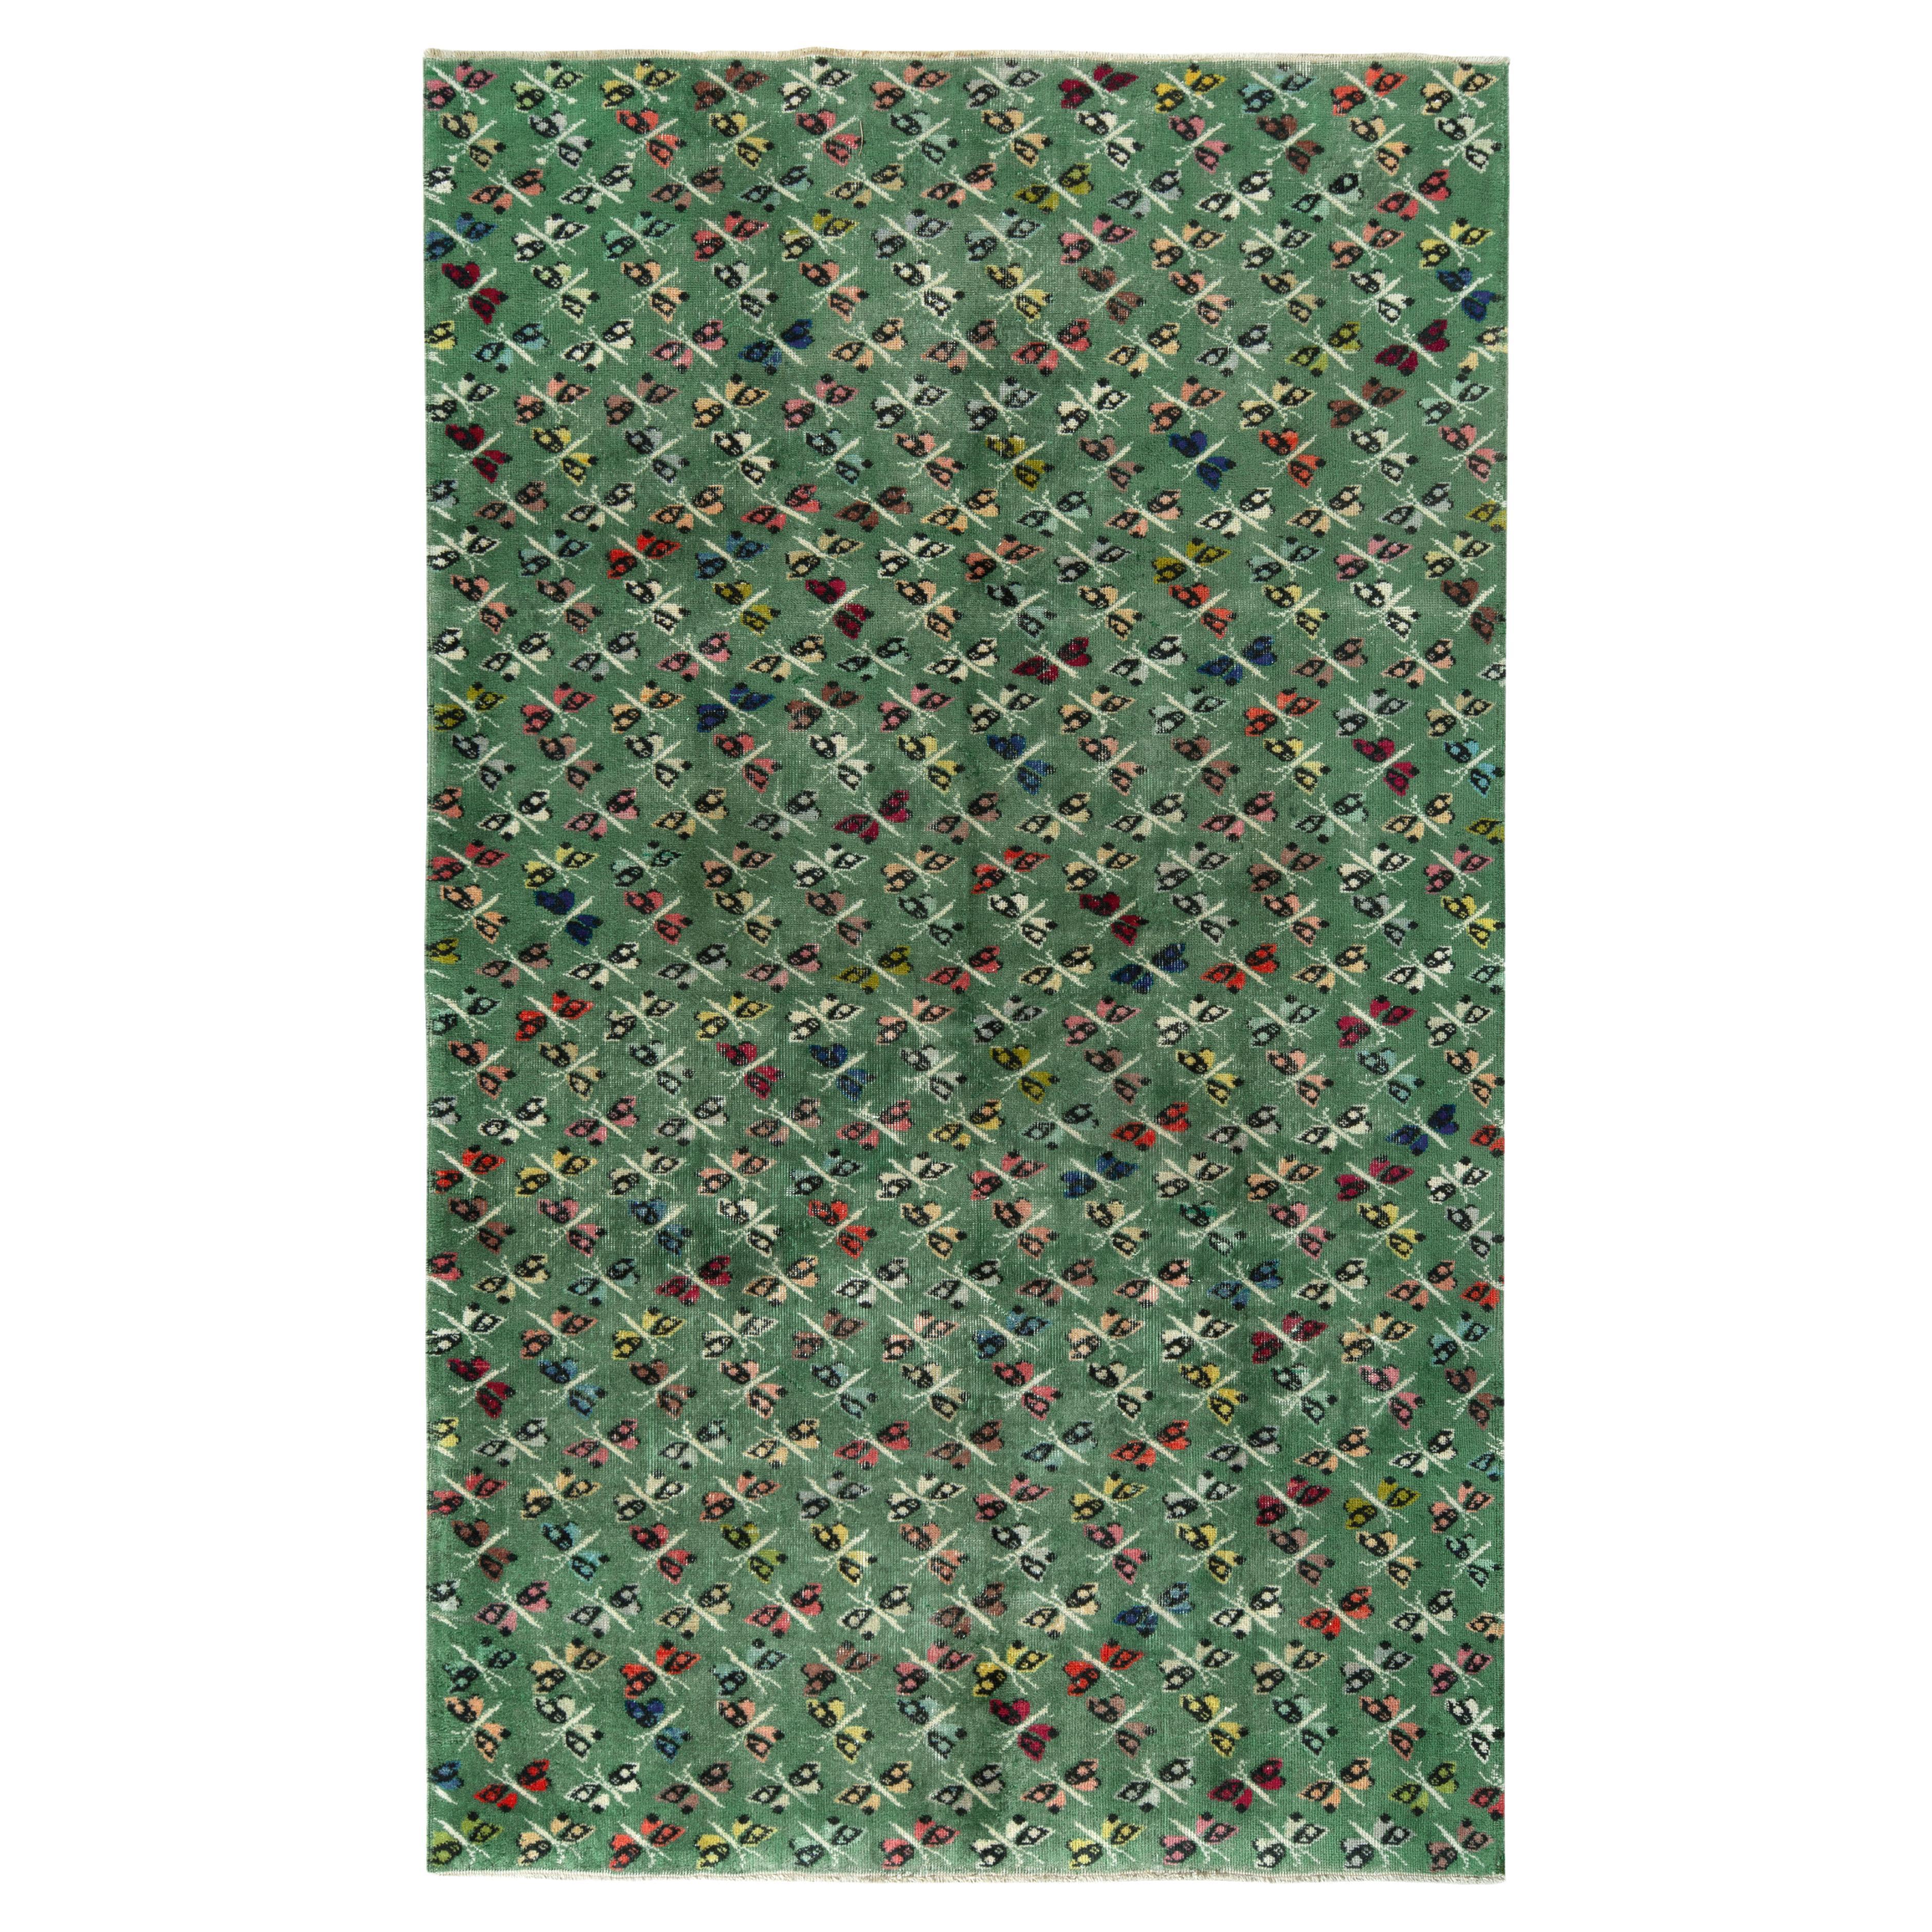 1960s Vintage Art Deco Rug in Green, Multicolor Pictorial Pattern by Rug & Kilim For Sale